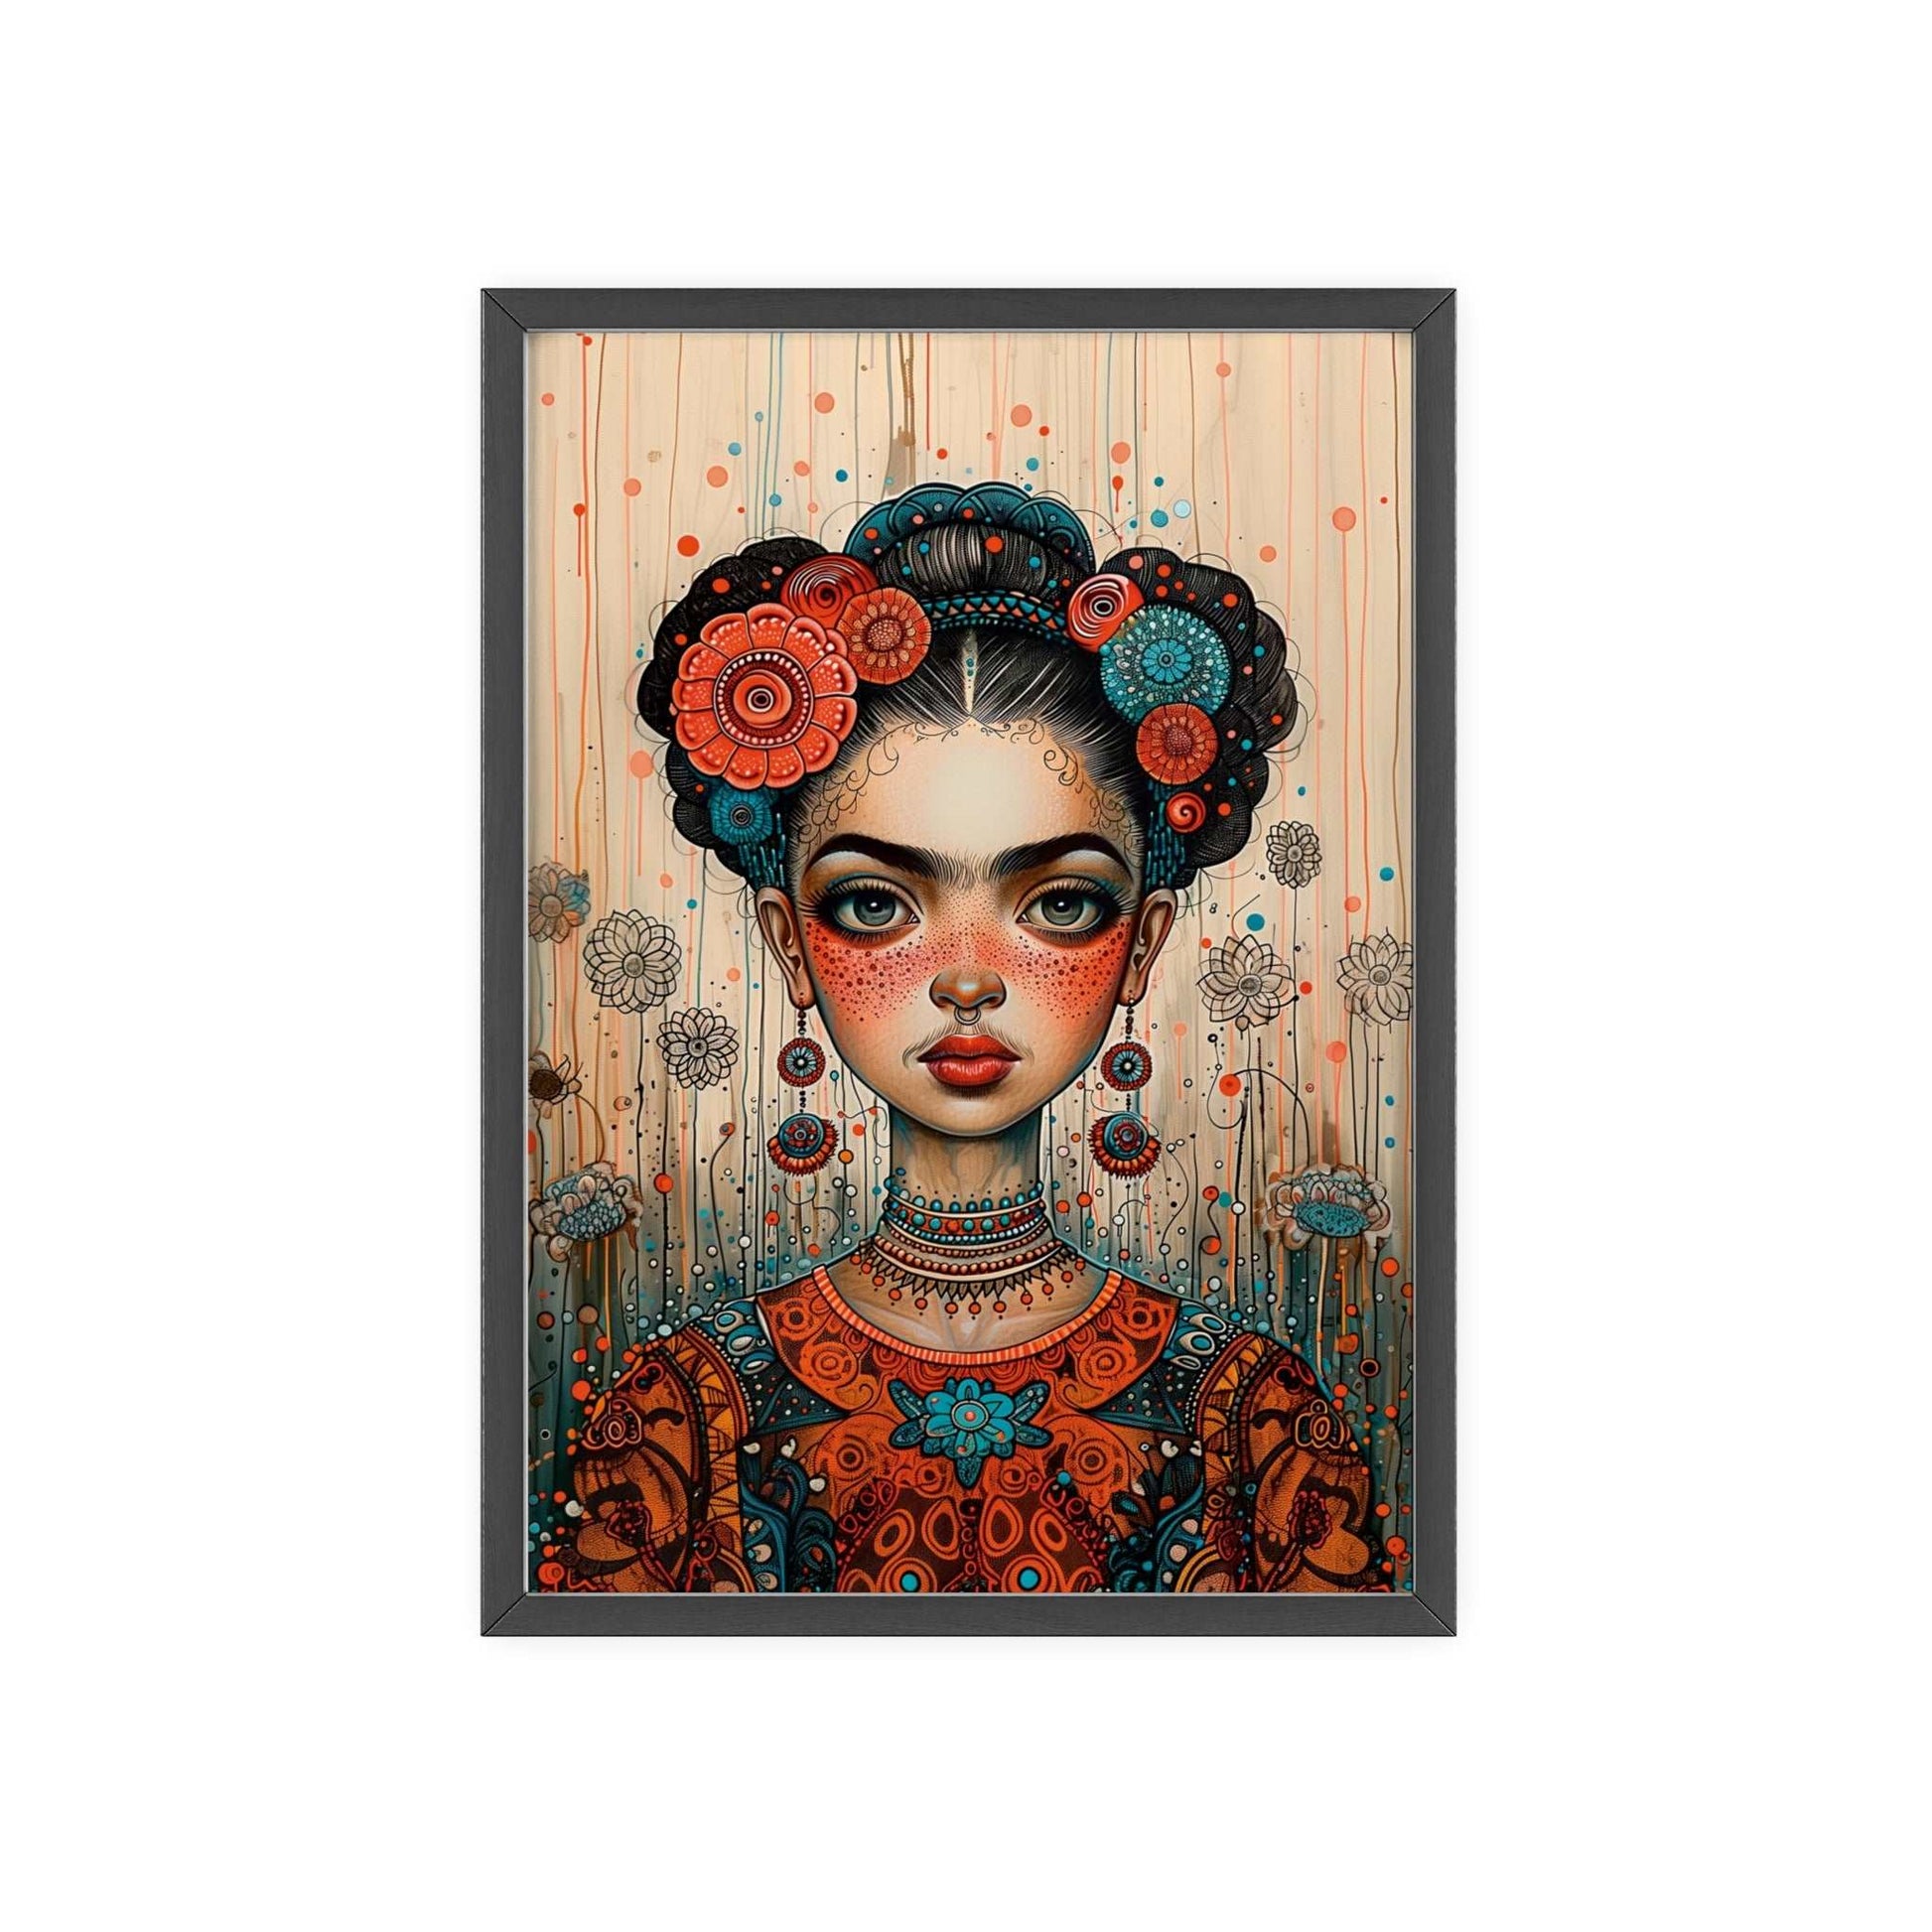 Framed poster titled "Frida in the Timeless Metaverse - Portrait". The poster depicts Frida Kahlo in a style reminiscent of Mab Graves and Klimt